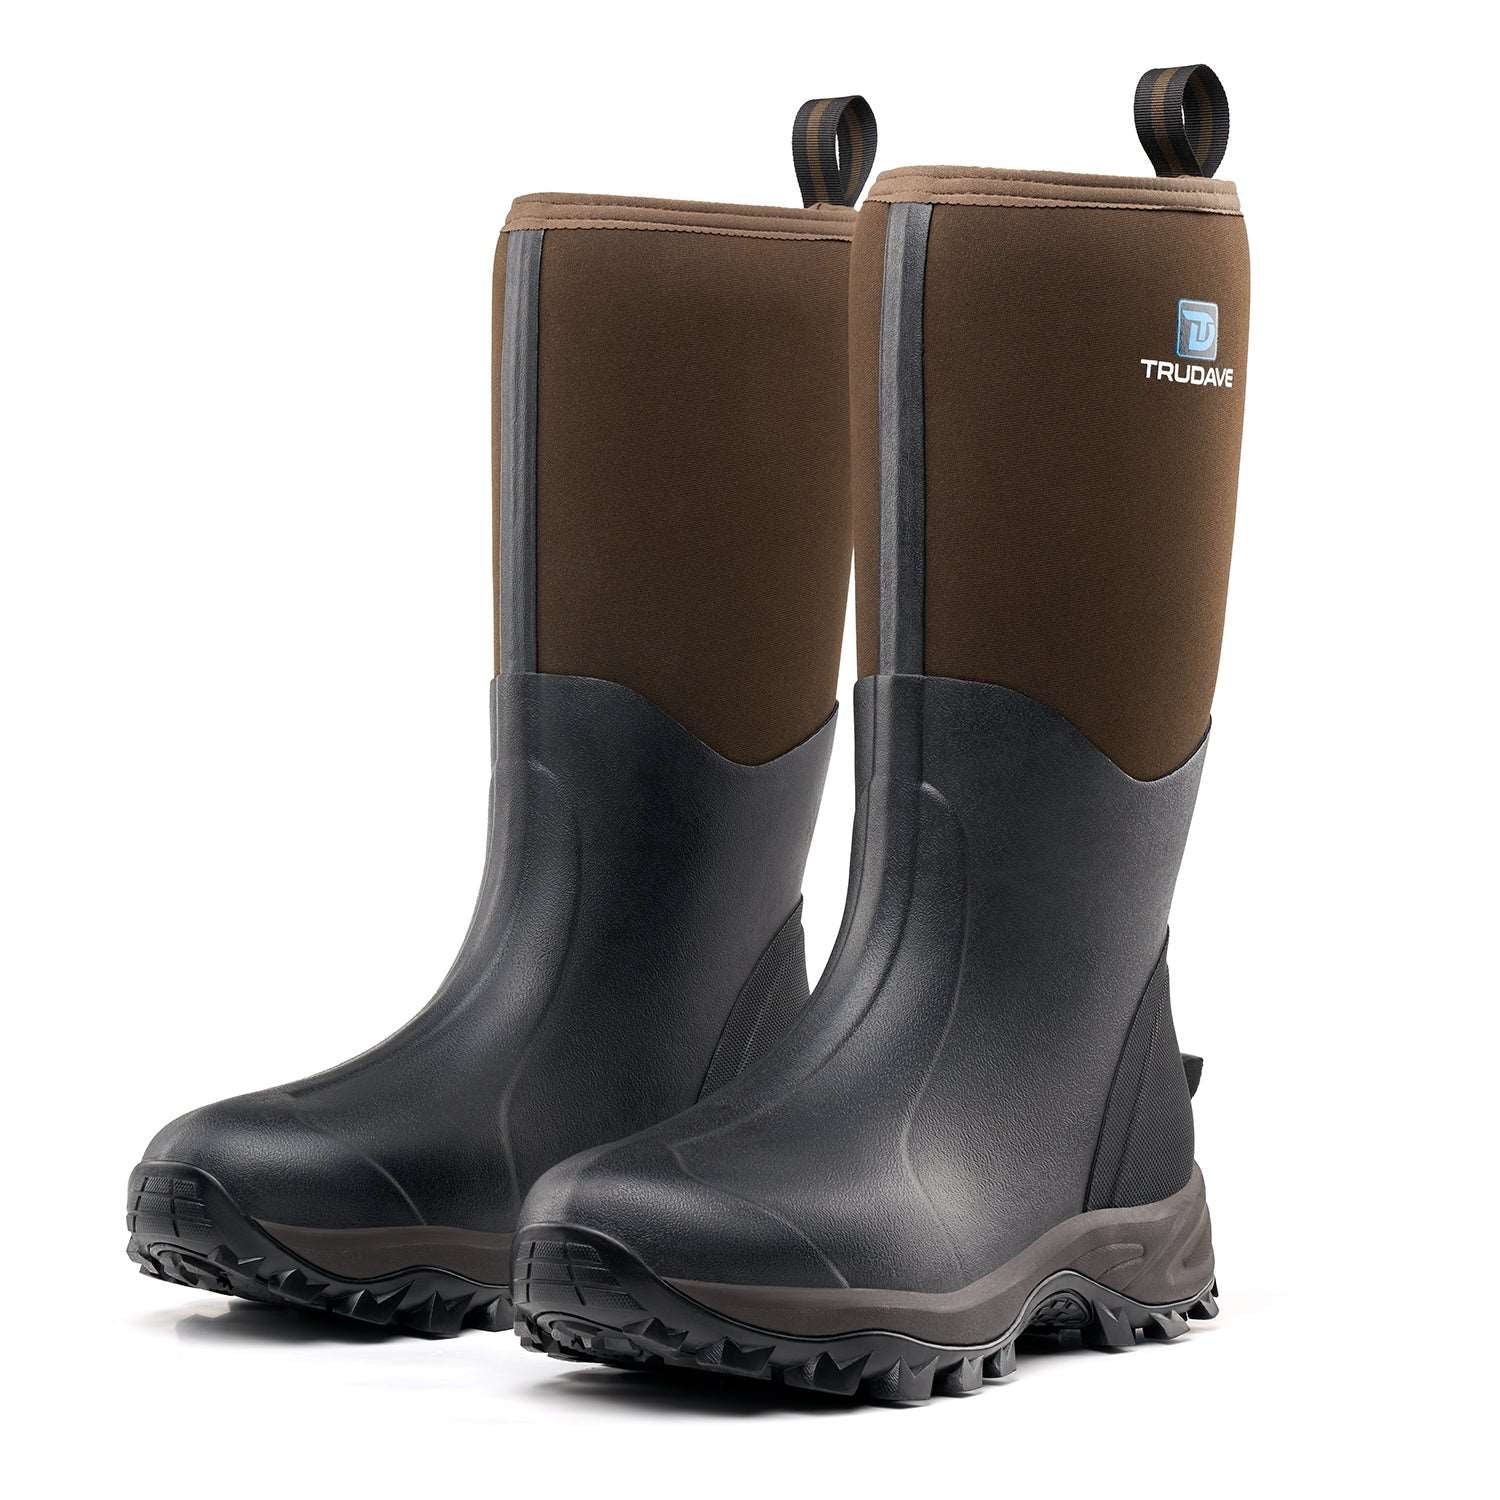 Trudave Rubber Work Boots for Men and Women-Brown